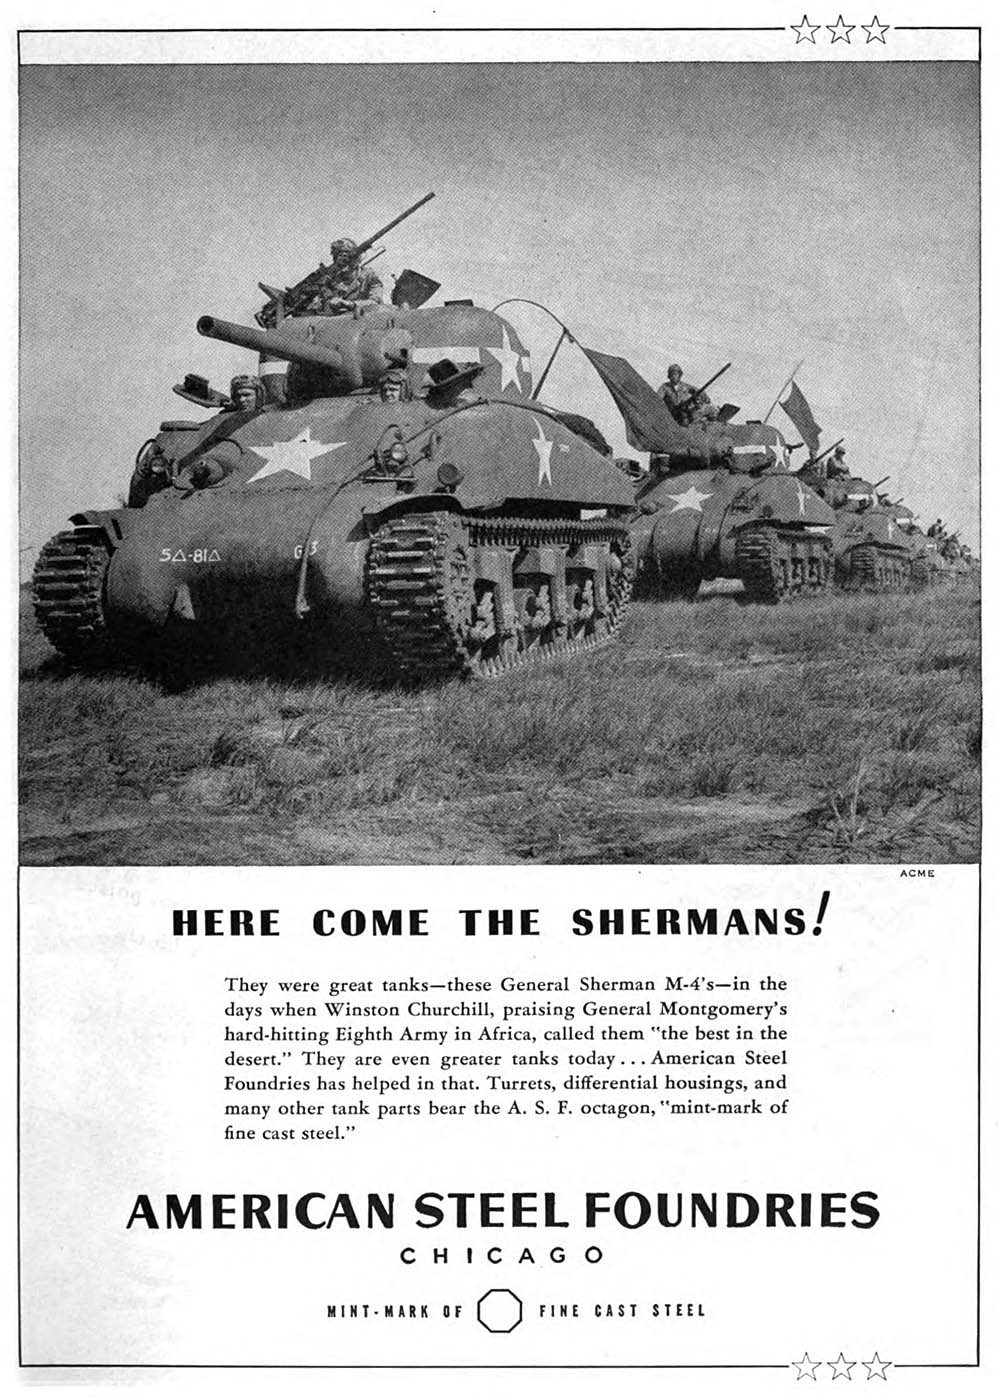 Here come the Shermans